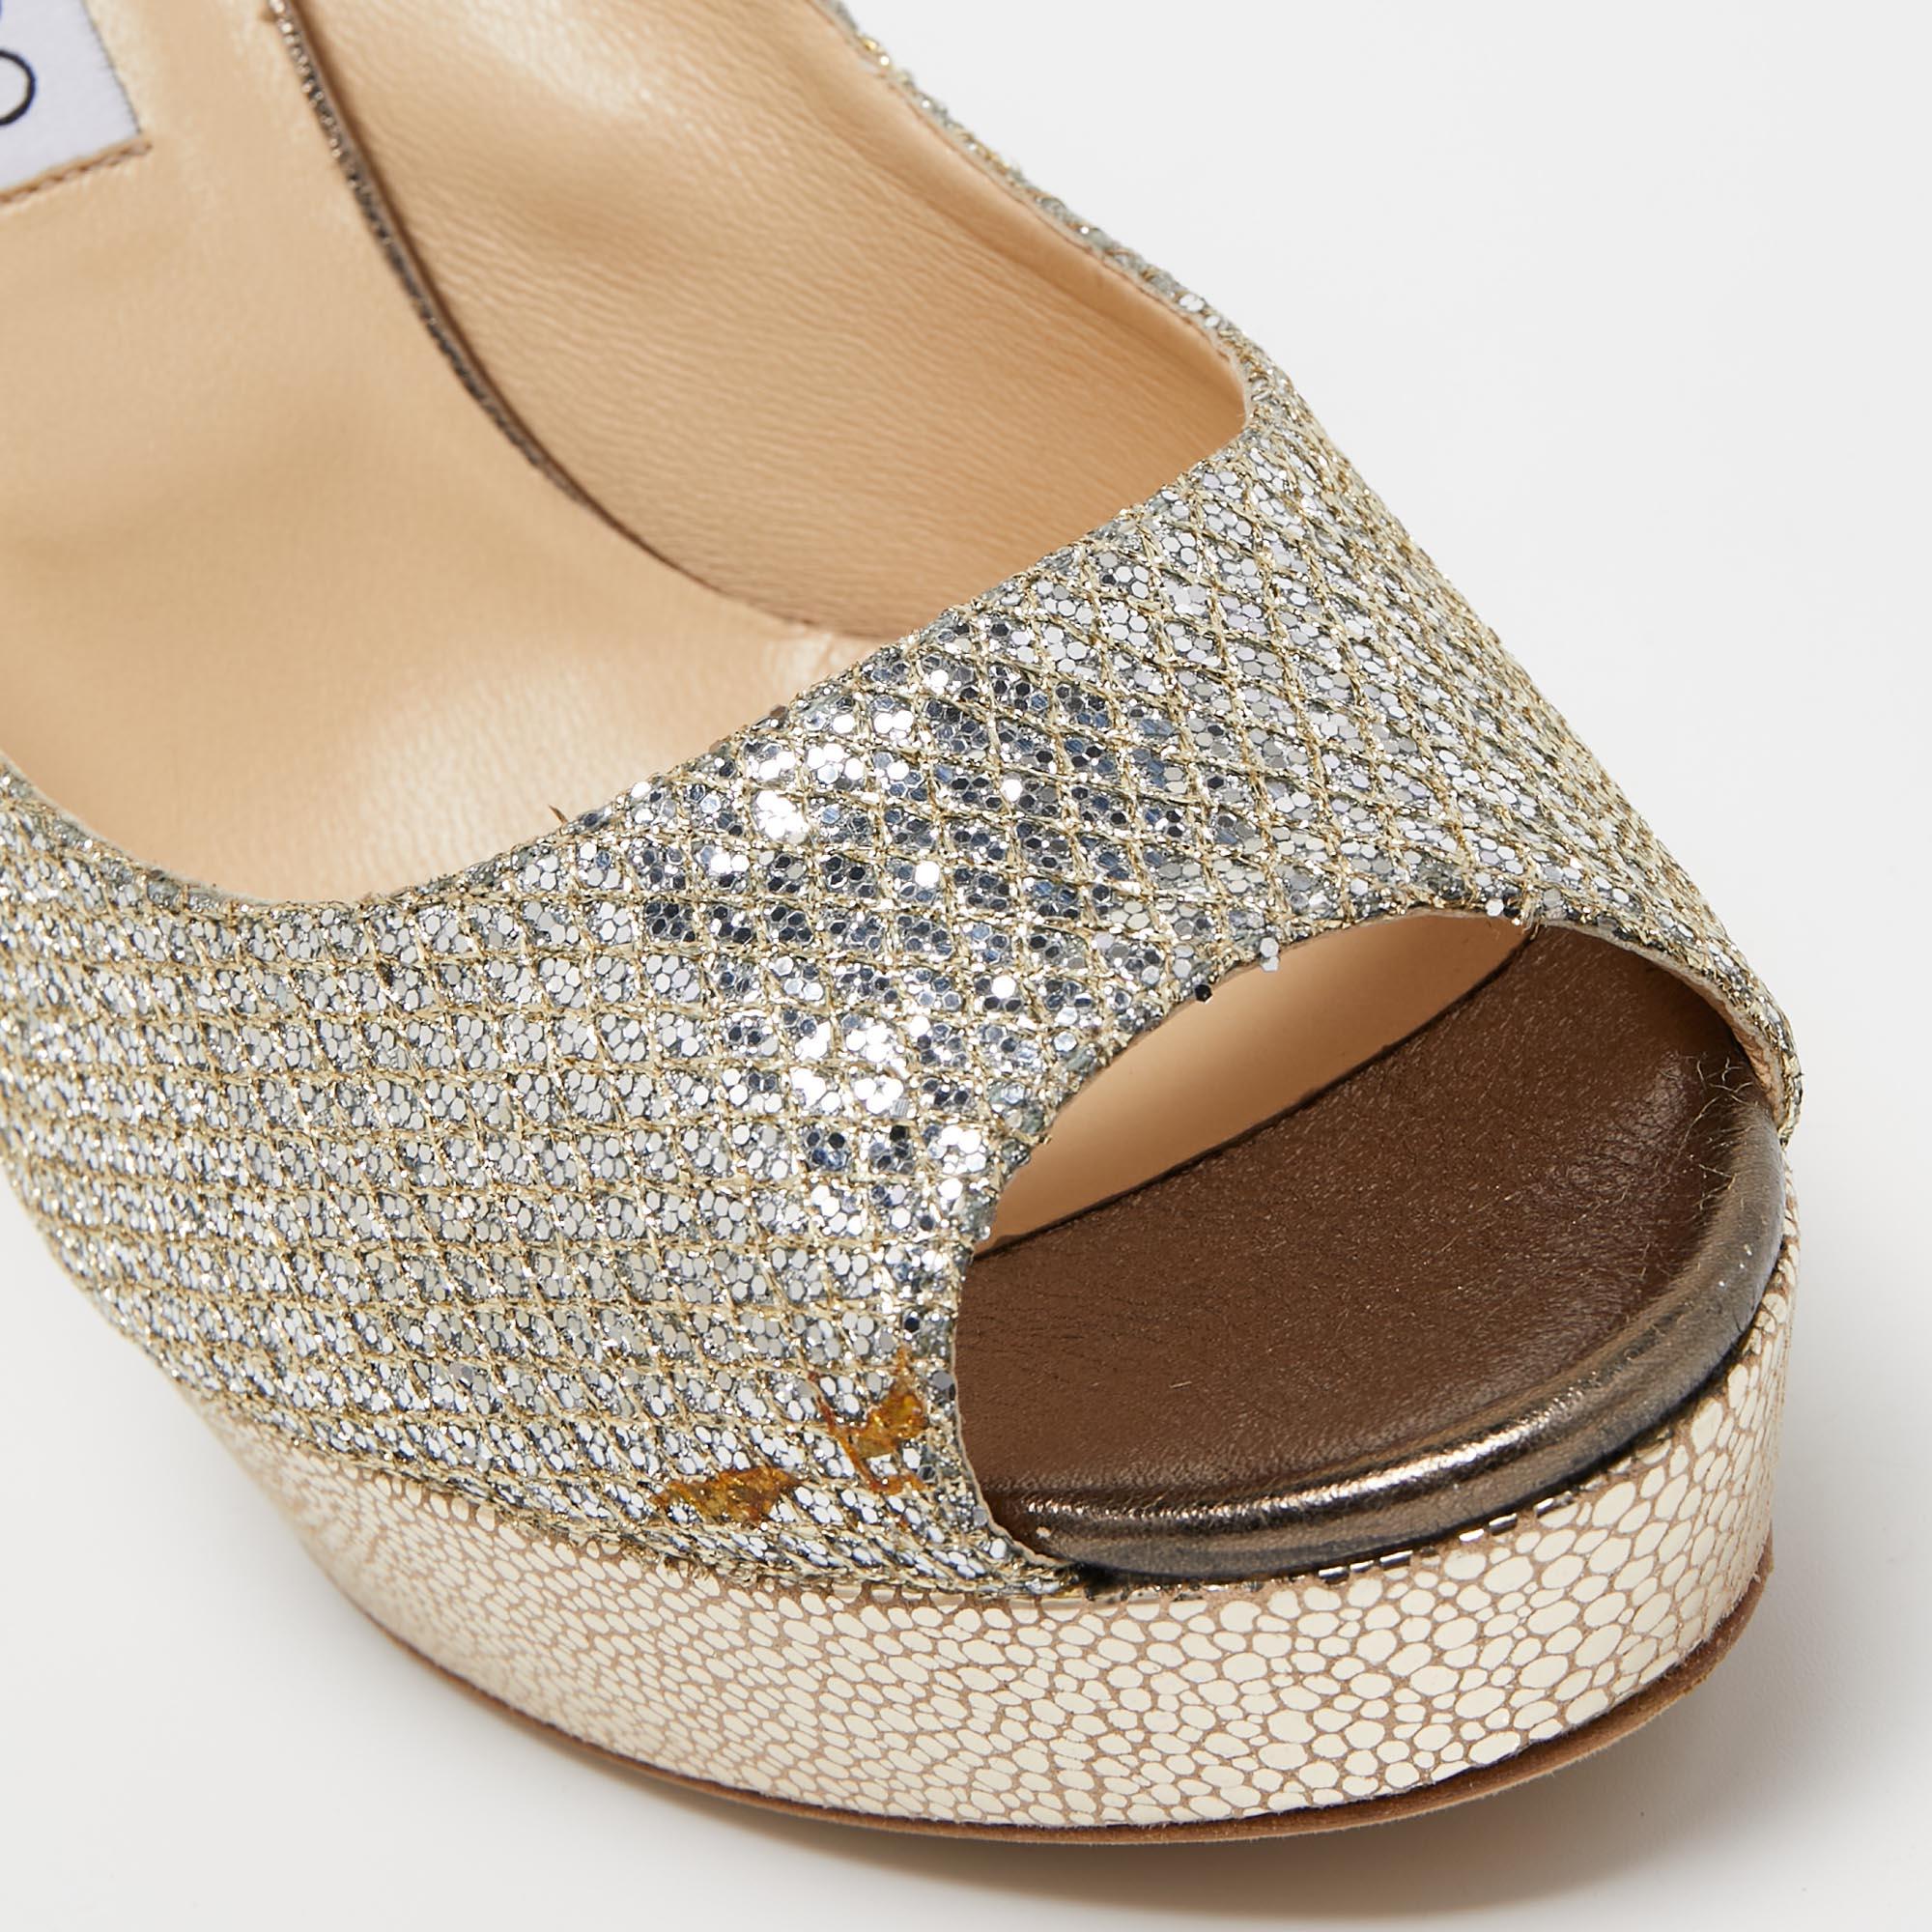 Jimmy Choo Gold/Silver Glitter and Leather Dahlia Peep Toe Pumps Size 41.5 1